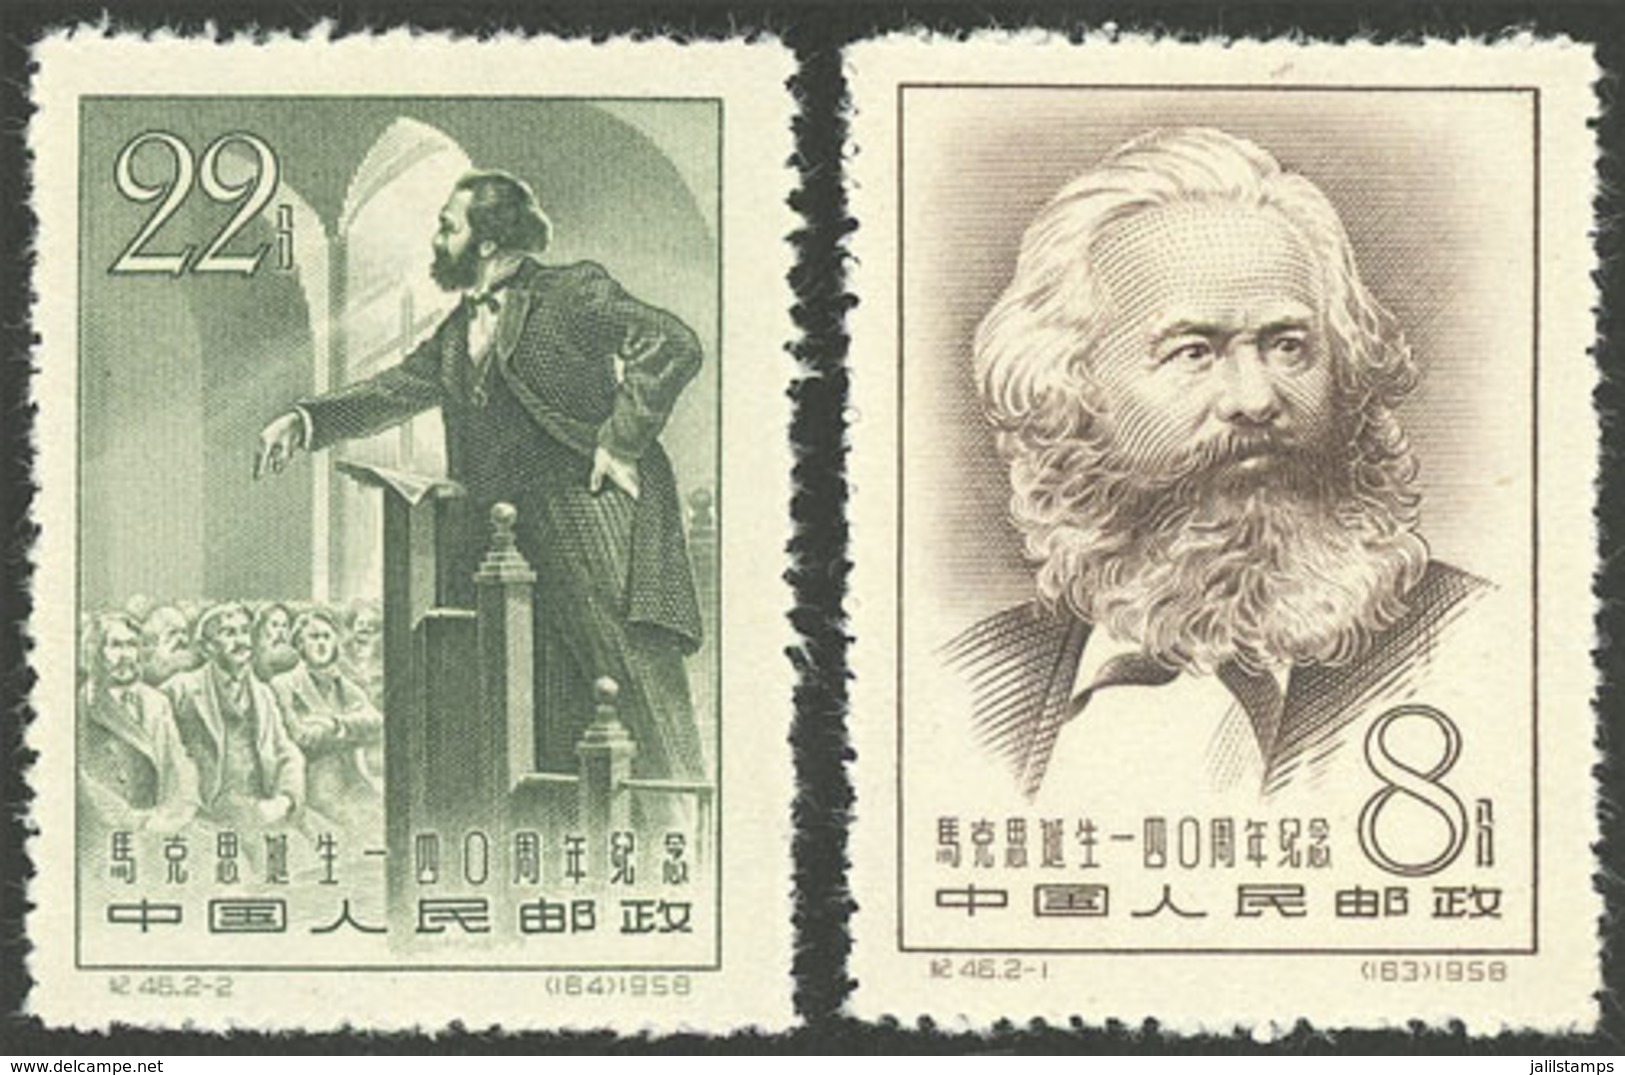 CHINA: Sc.345/346, 1958 Karl Marx, Cmpl. Set Of 2 Values, Mint Lightly Hinged (issued Without Gum), VF Quality! - Used Stamps